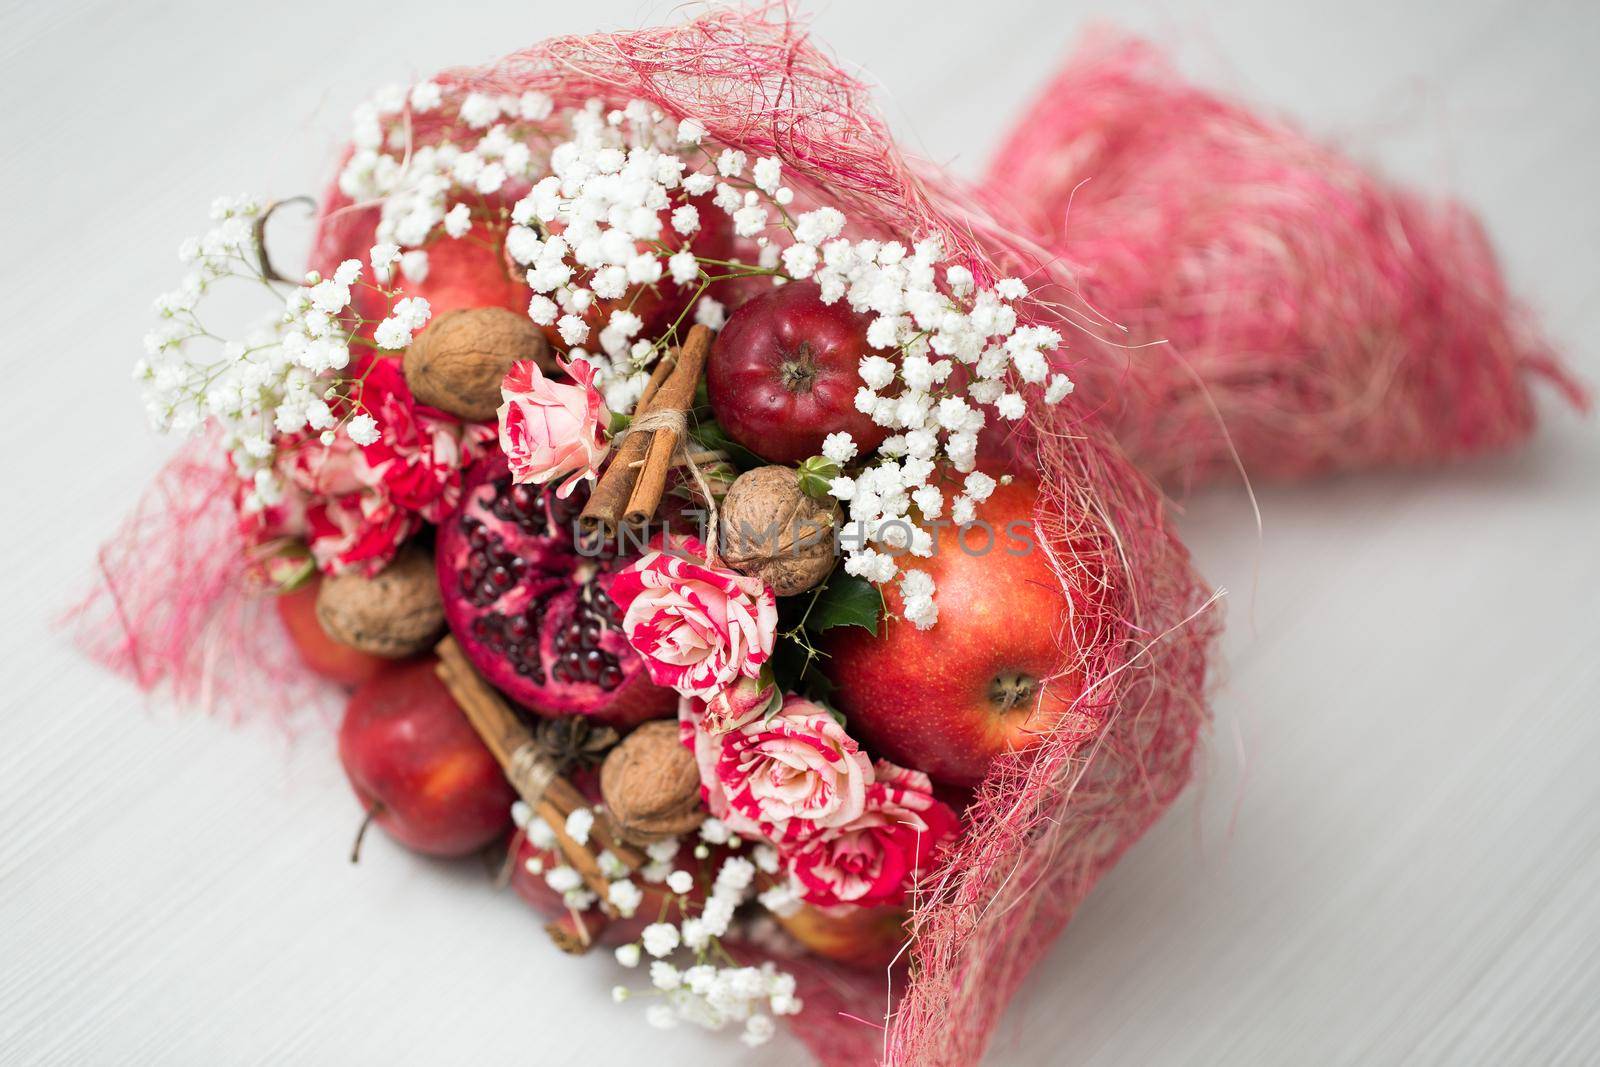 The original unusual edible bouquet of vegetables and fruits